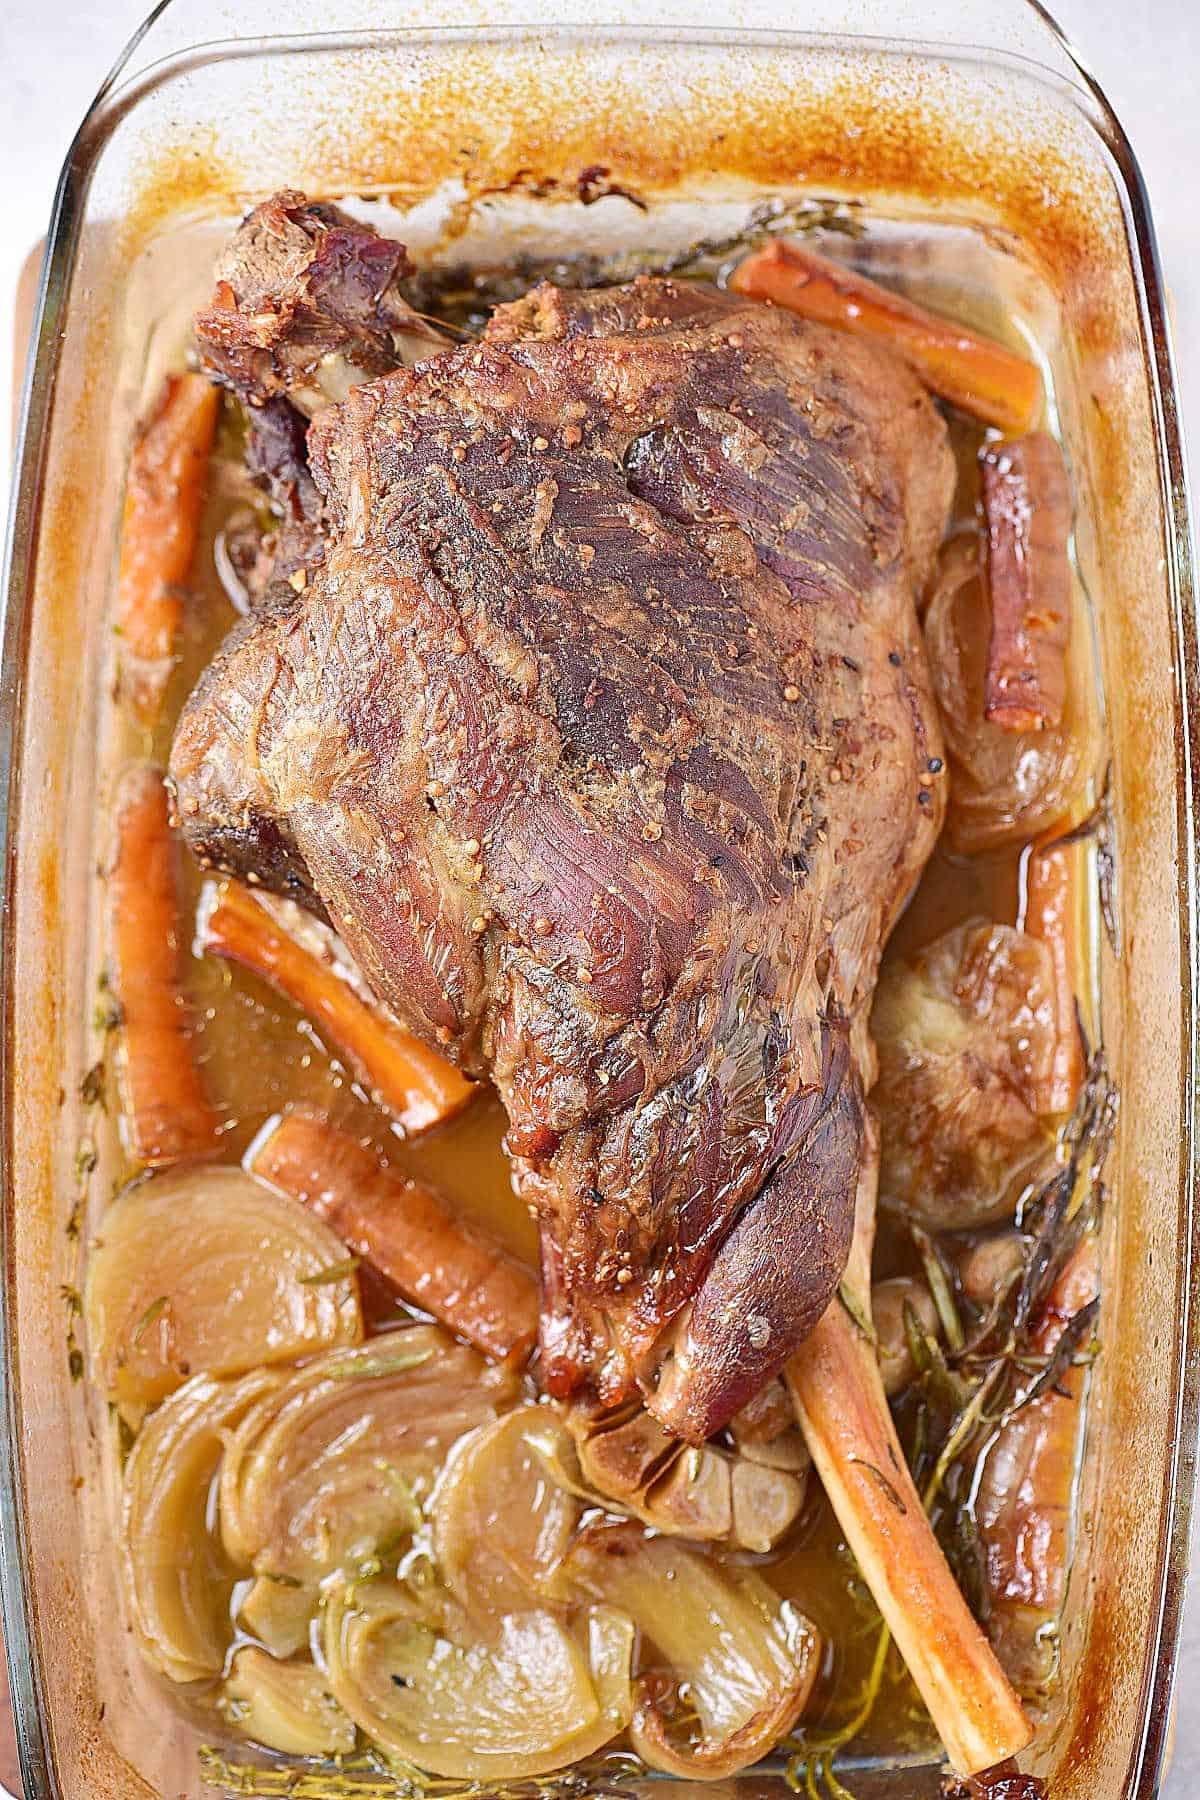 Oven roasted leg of lamb with carrots and onions in a glass dish.